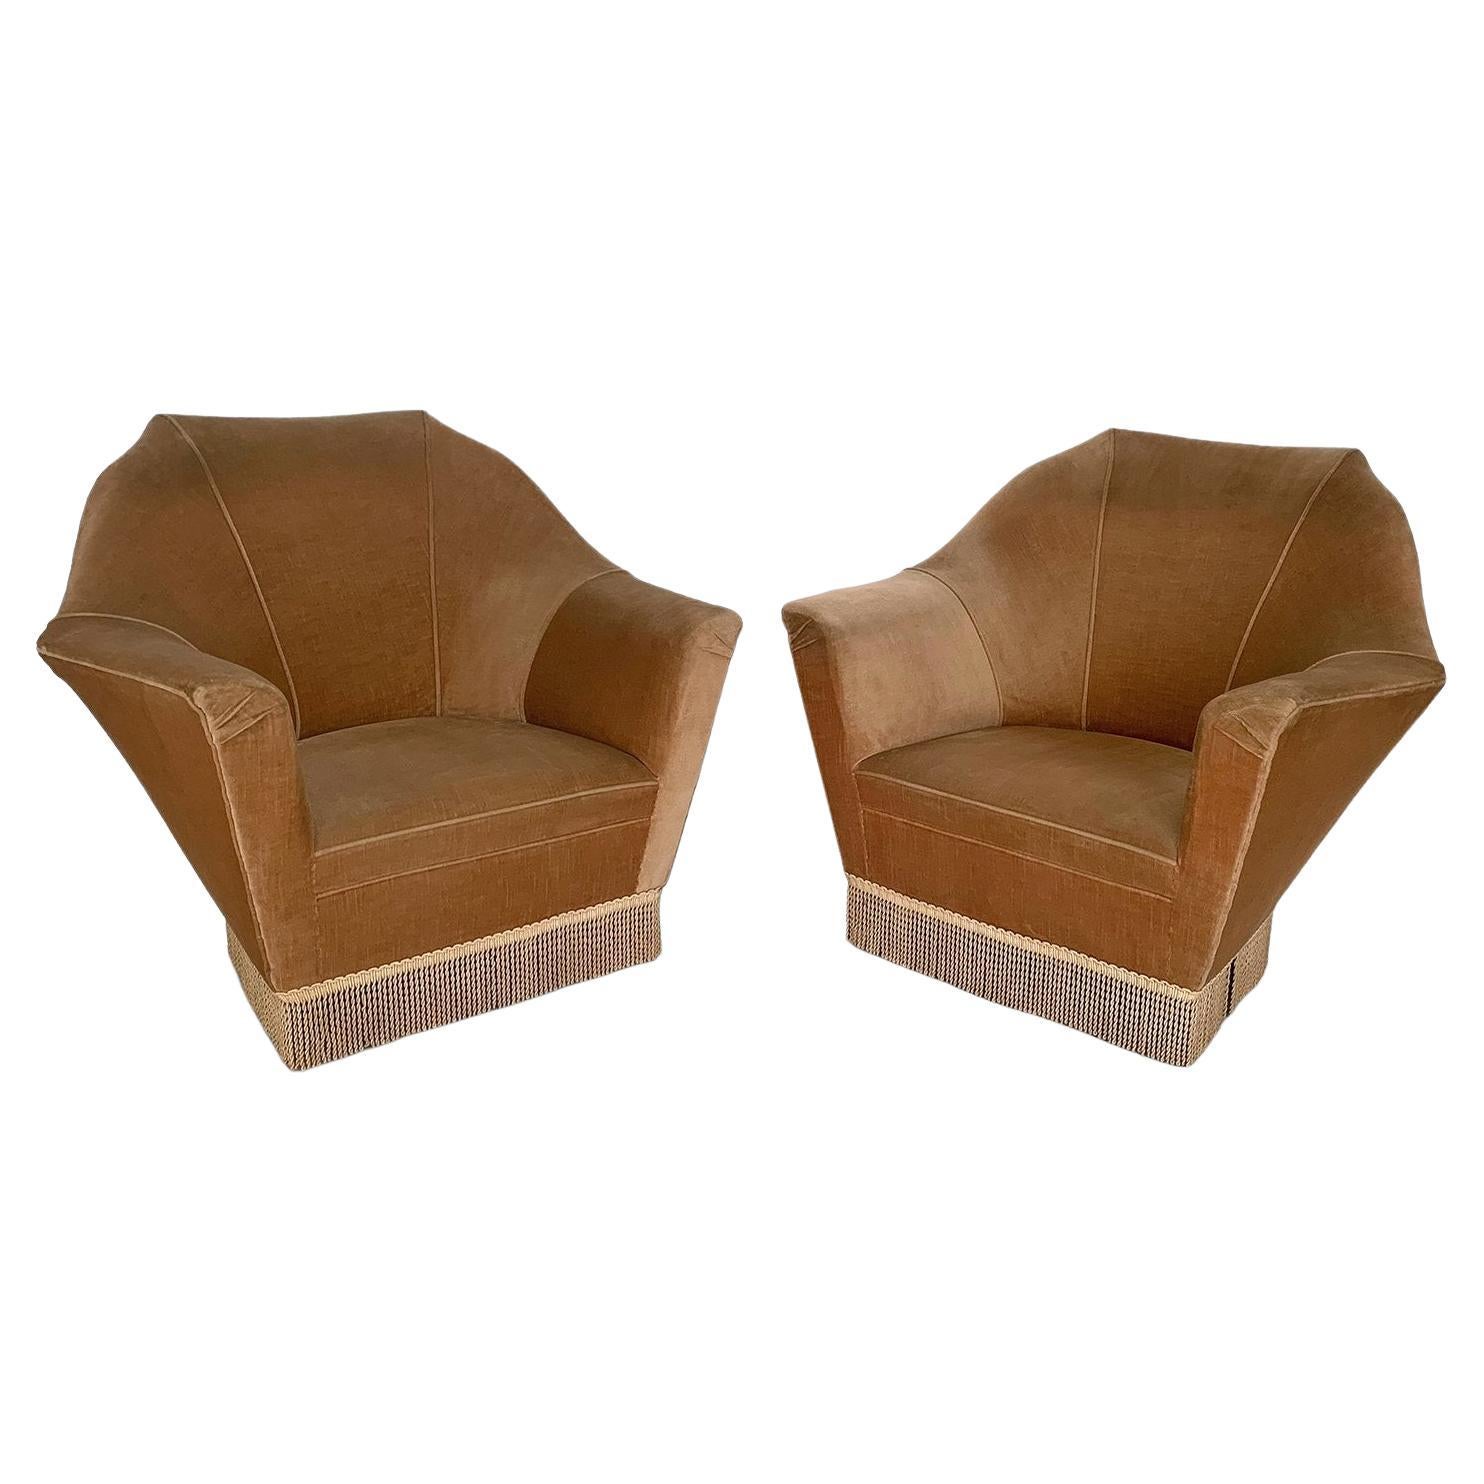 Mid-Century Pair of Ico Parisi Armchairs for Ariberto Colombo, Set of 2, 1950s For Sale